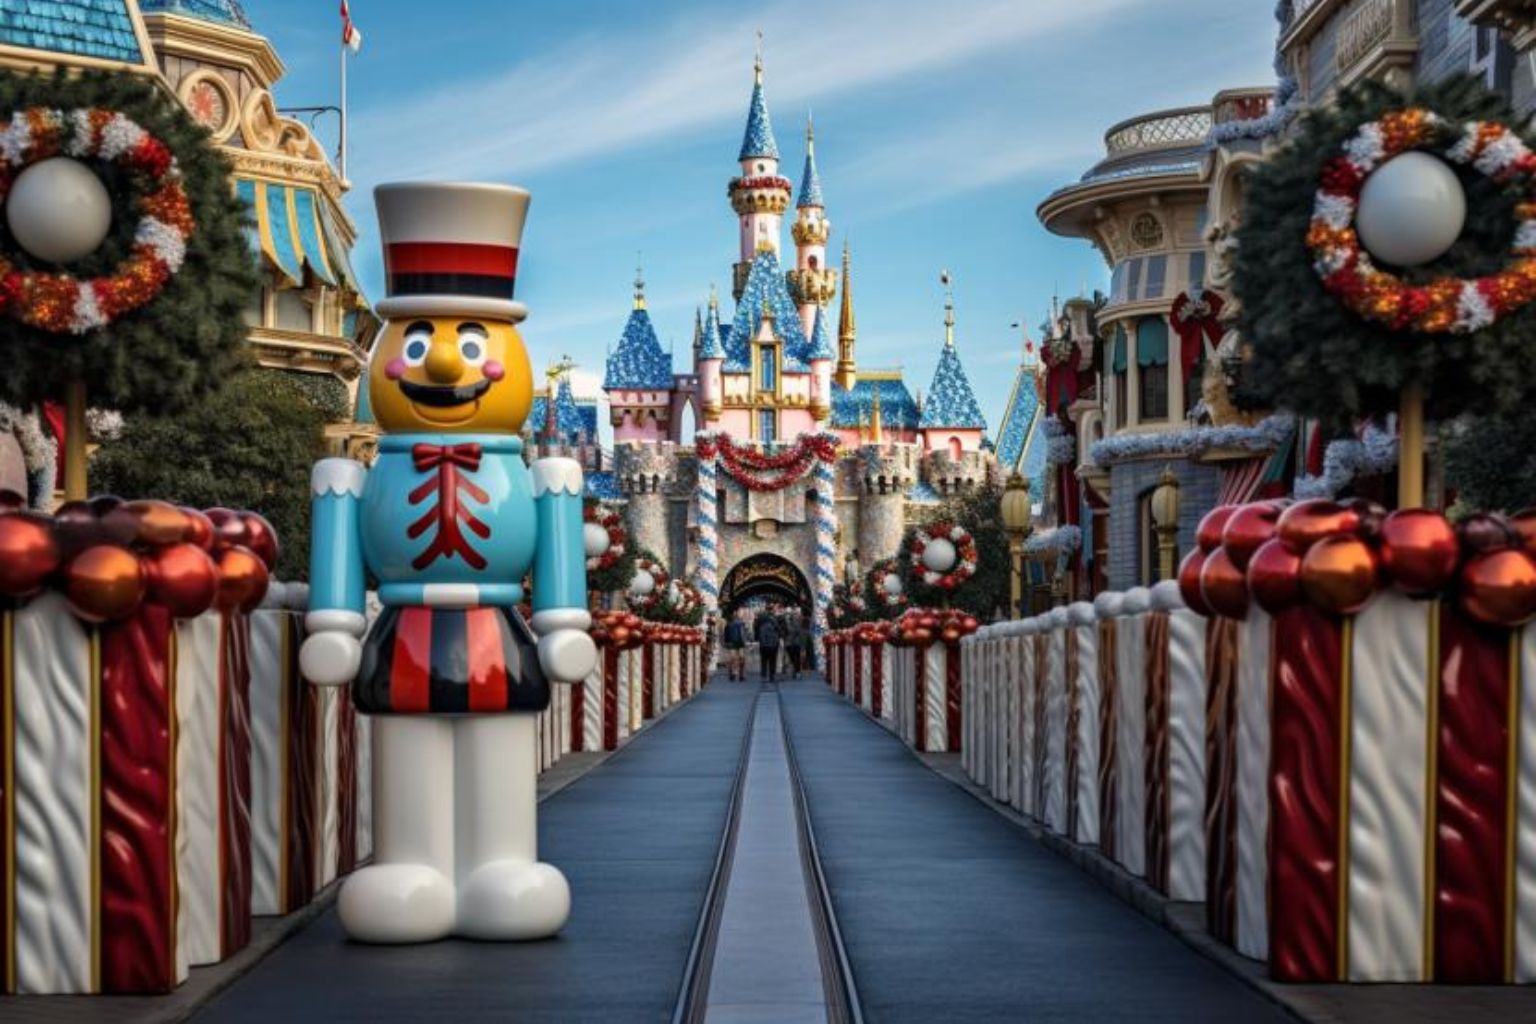 I booked a Disneyland vacation through Southwest Vacations but entered the wrong date, resulting in being considered 'no-shows'.